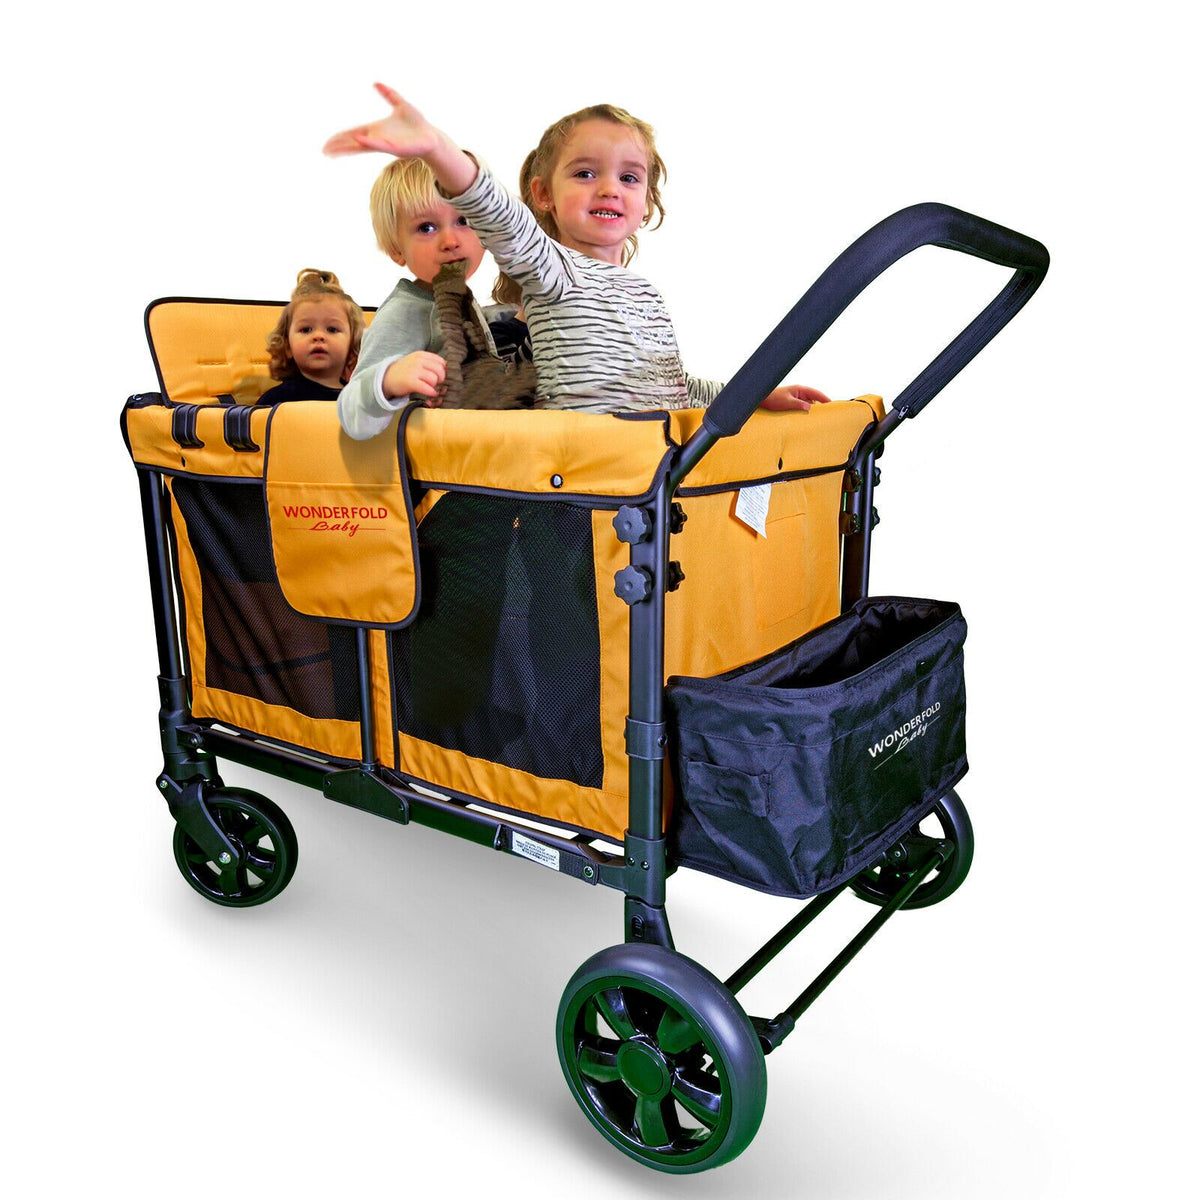 WonderFold Baby W4 Multi-Function Folding Quad Stroller Wagon with Removable Canopy and Seats Orange New